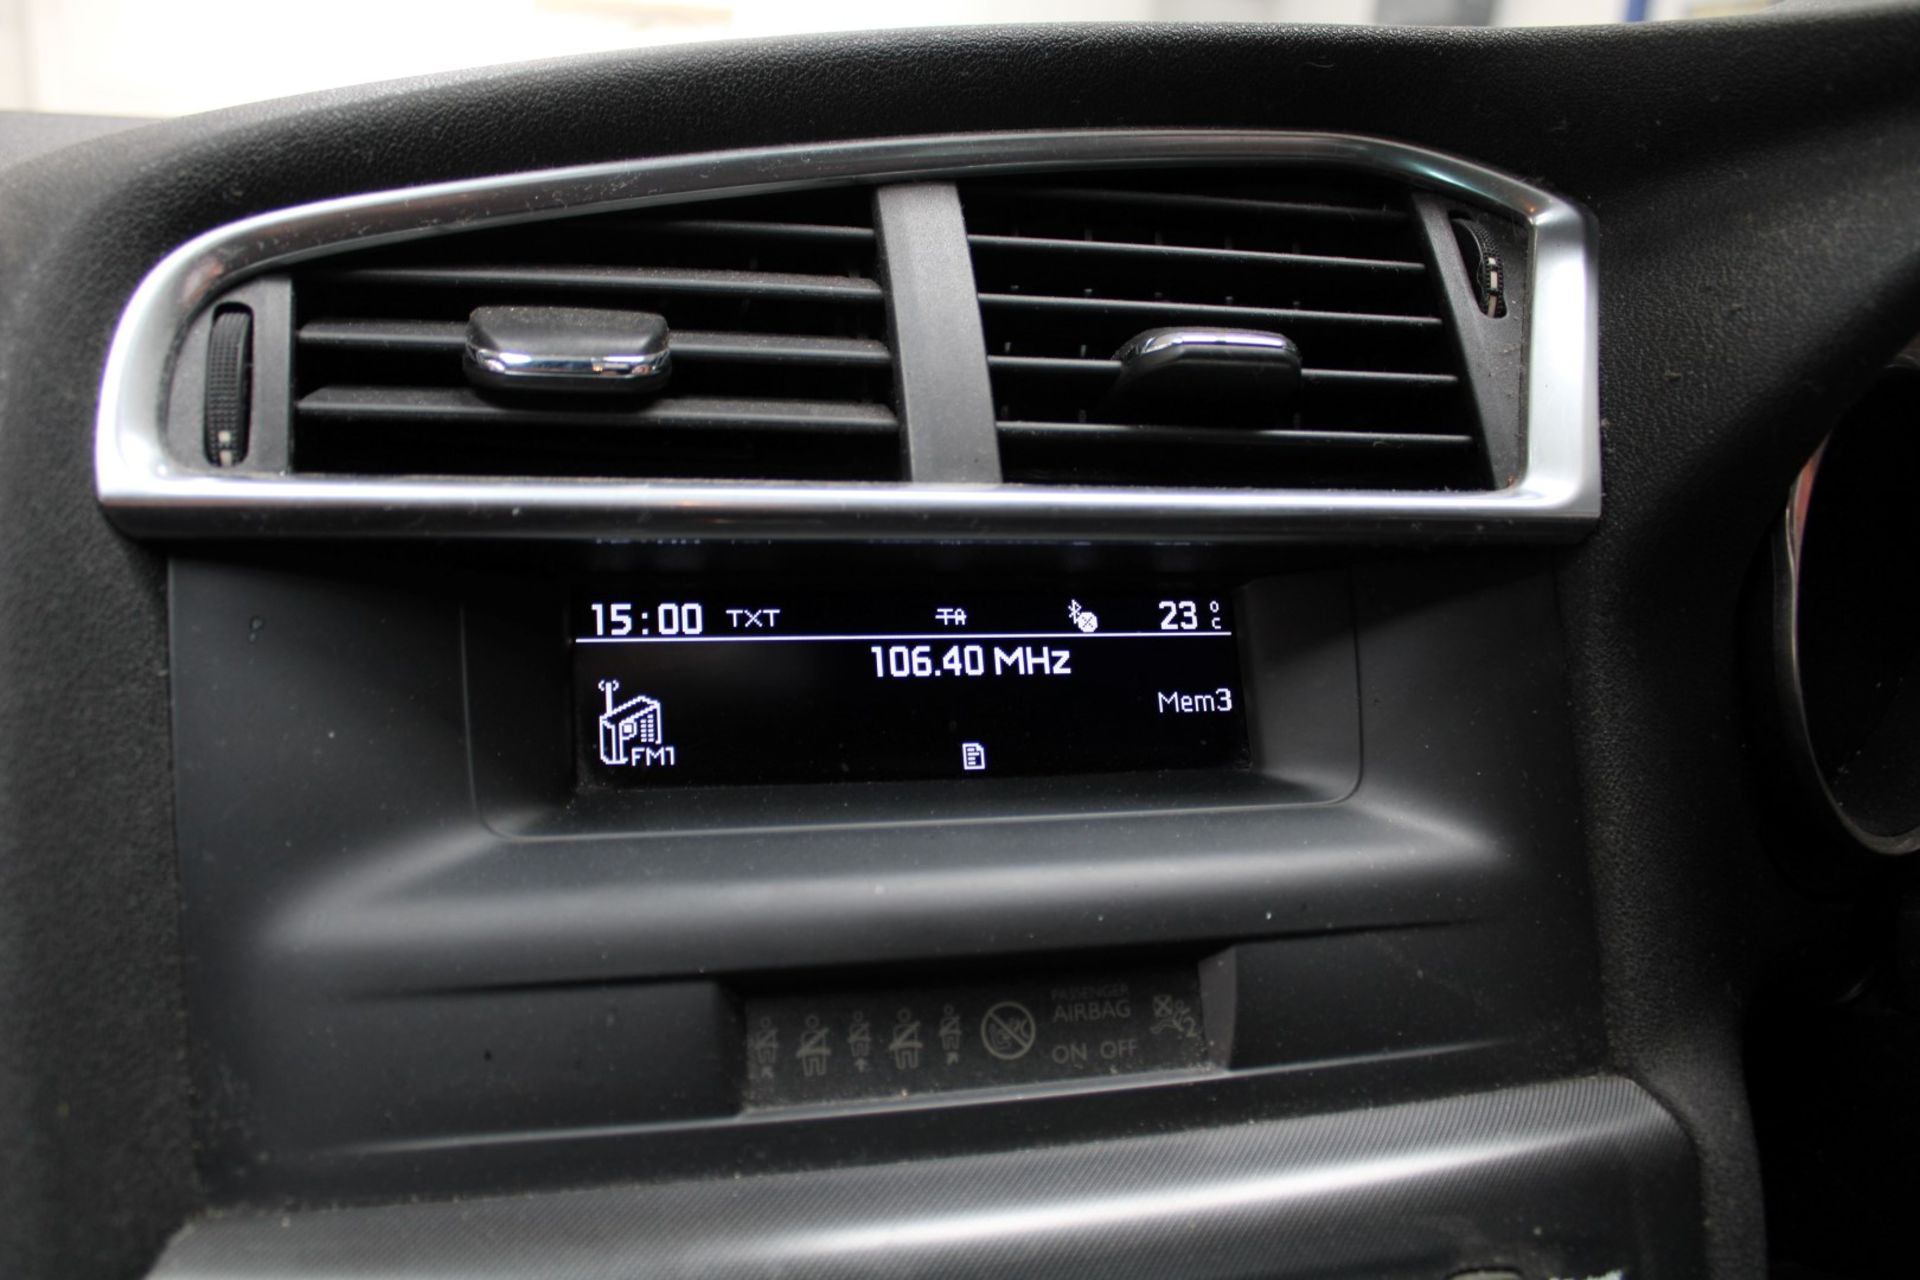 11 11 Citroen DS4 DStyle HDI - Image 8 of 35